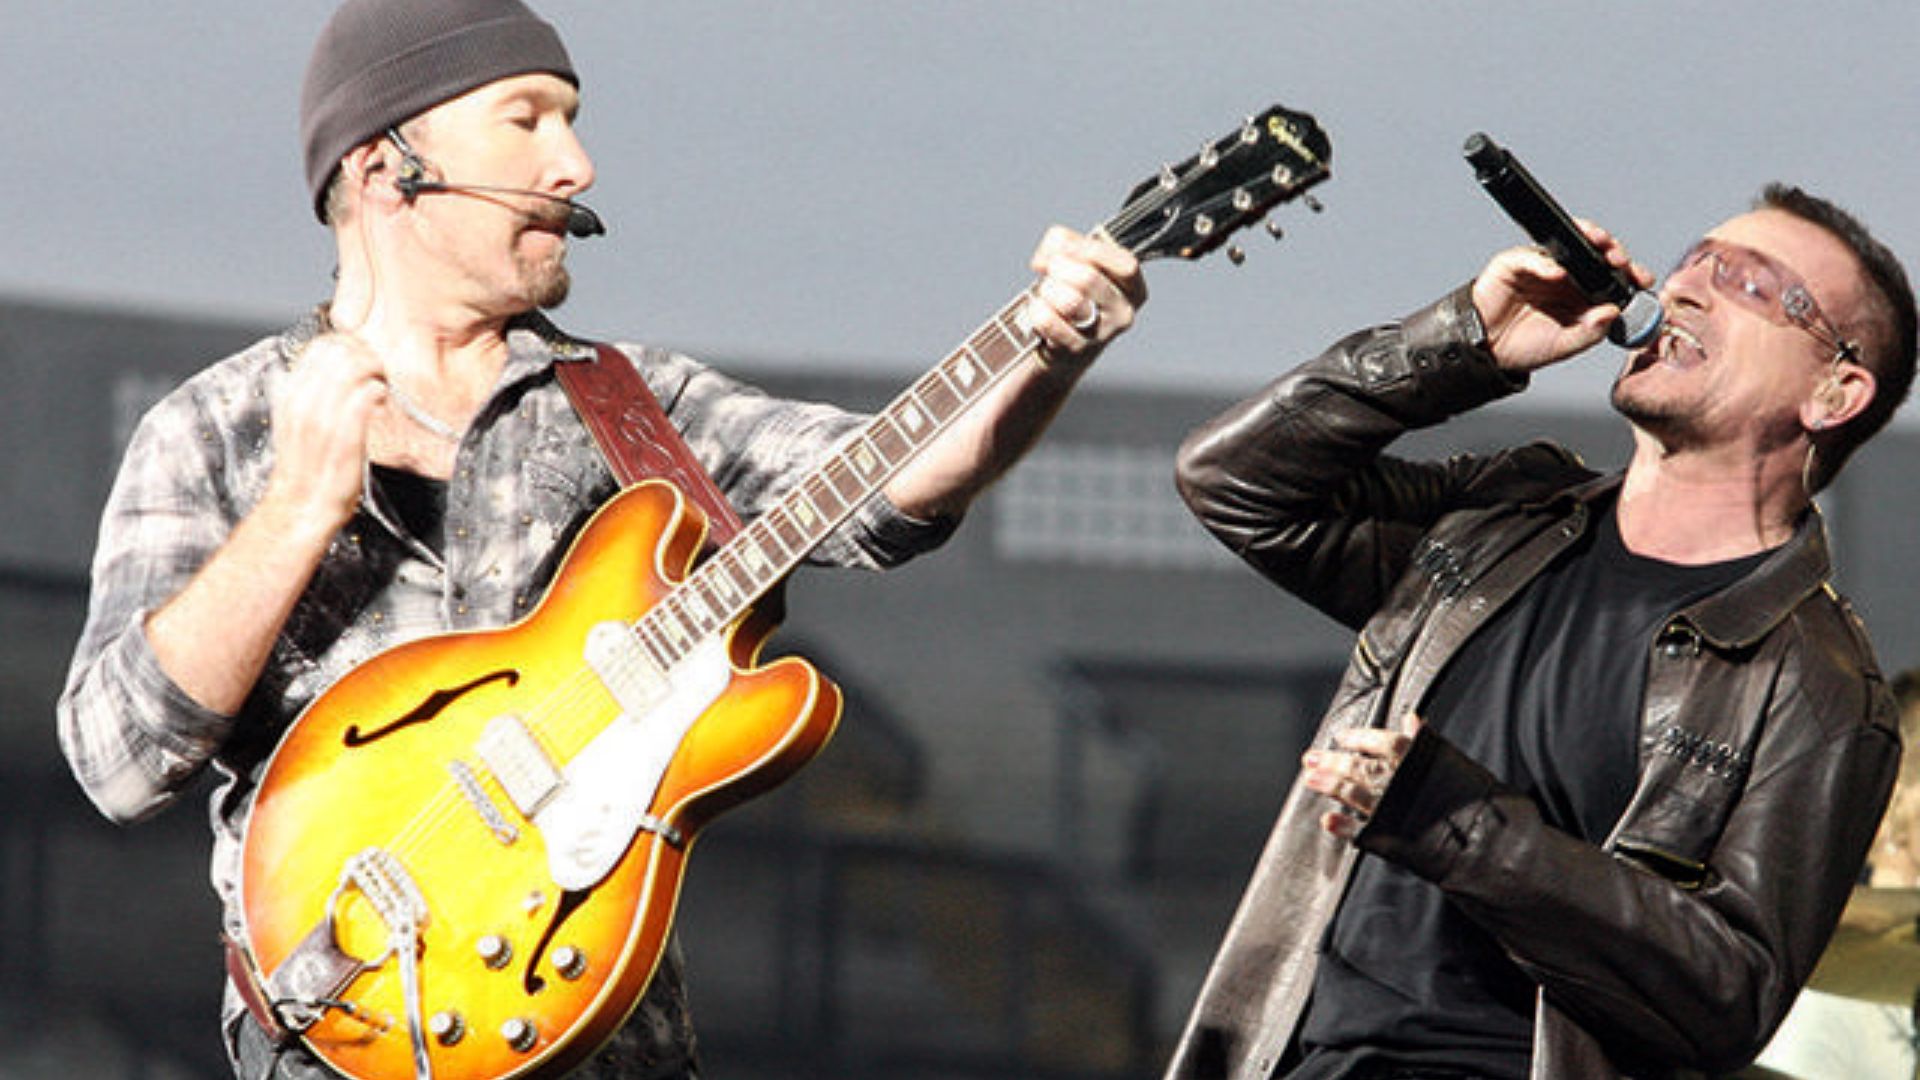 David Howell Evans Playing Guitar with Bono, Vocalist of the Dublin Rock Band U2